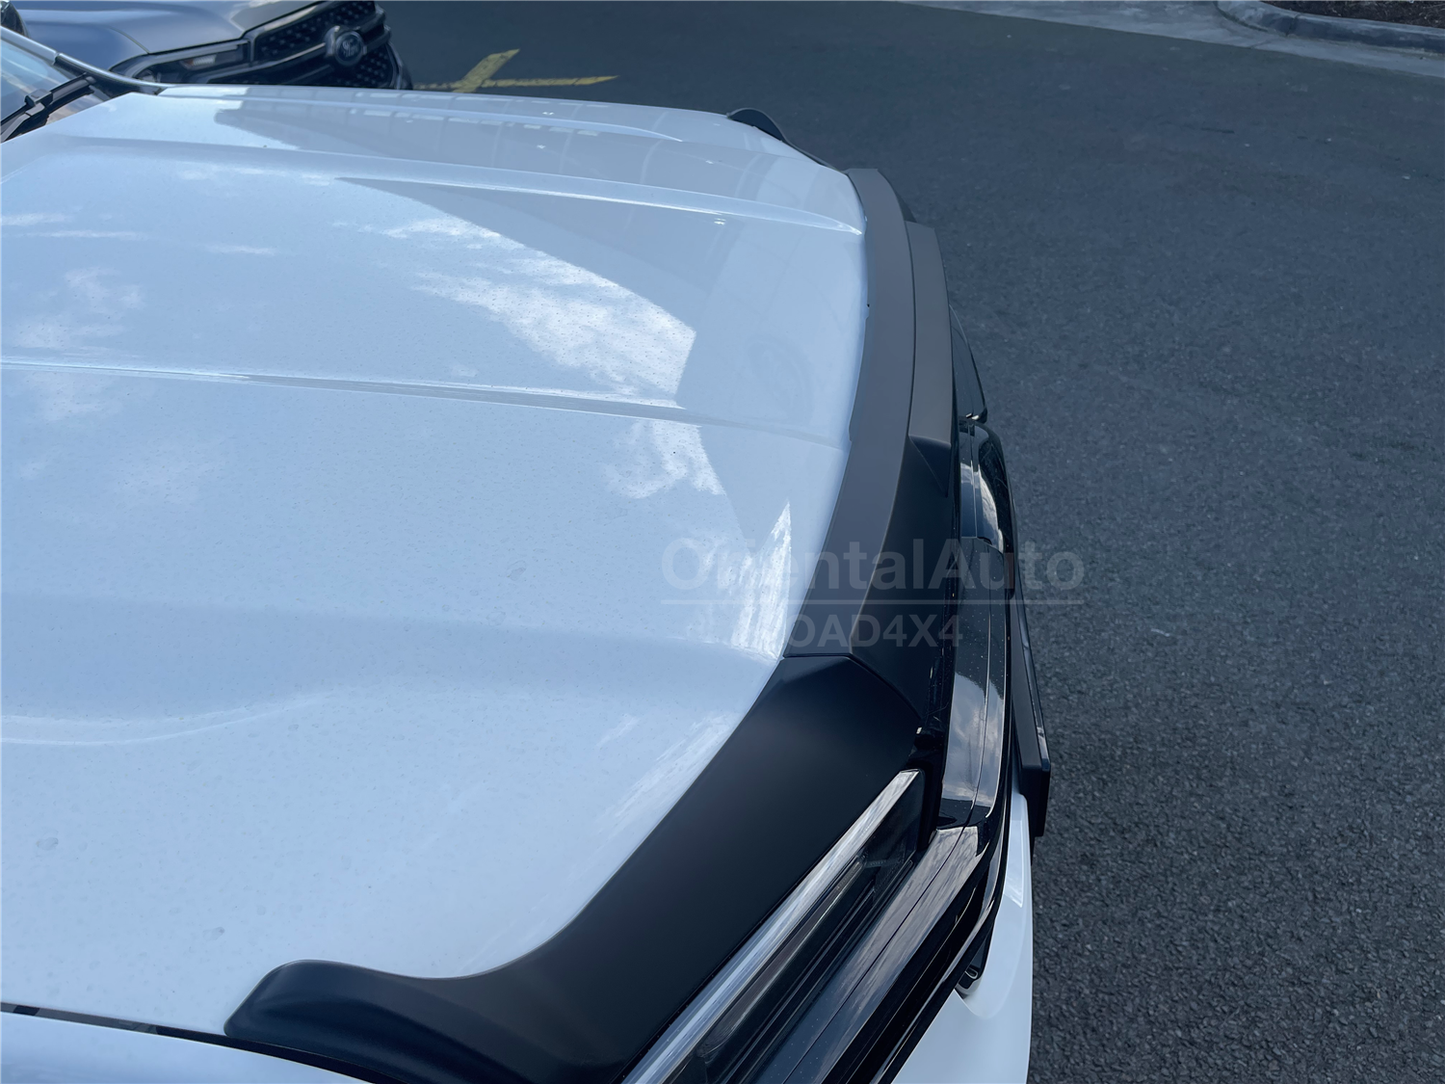 Injection Bonnet Protector & Injection Weathershields Weather Shields Window Visor For Ford Everest Next-Gen 2022-Onwards Hood Protector Guard